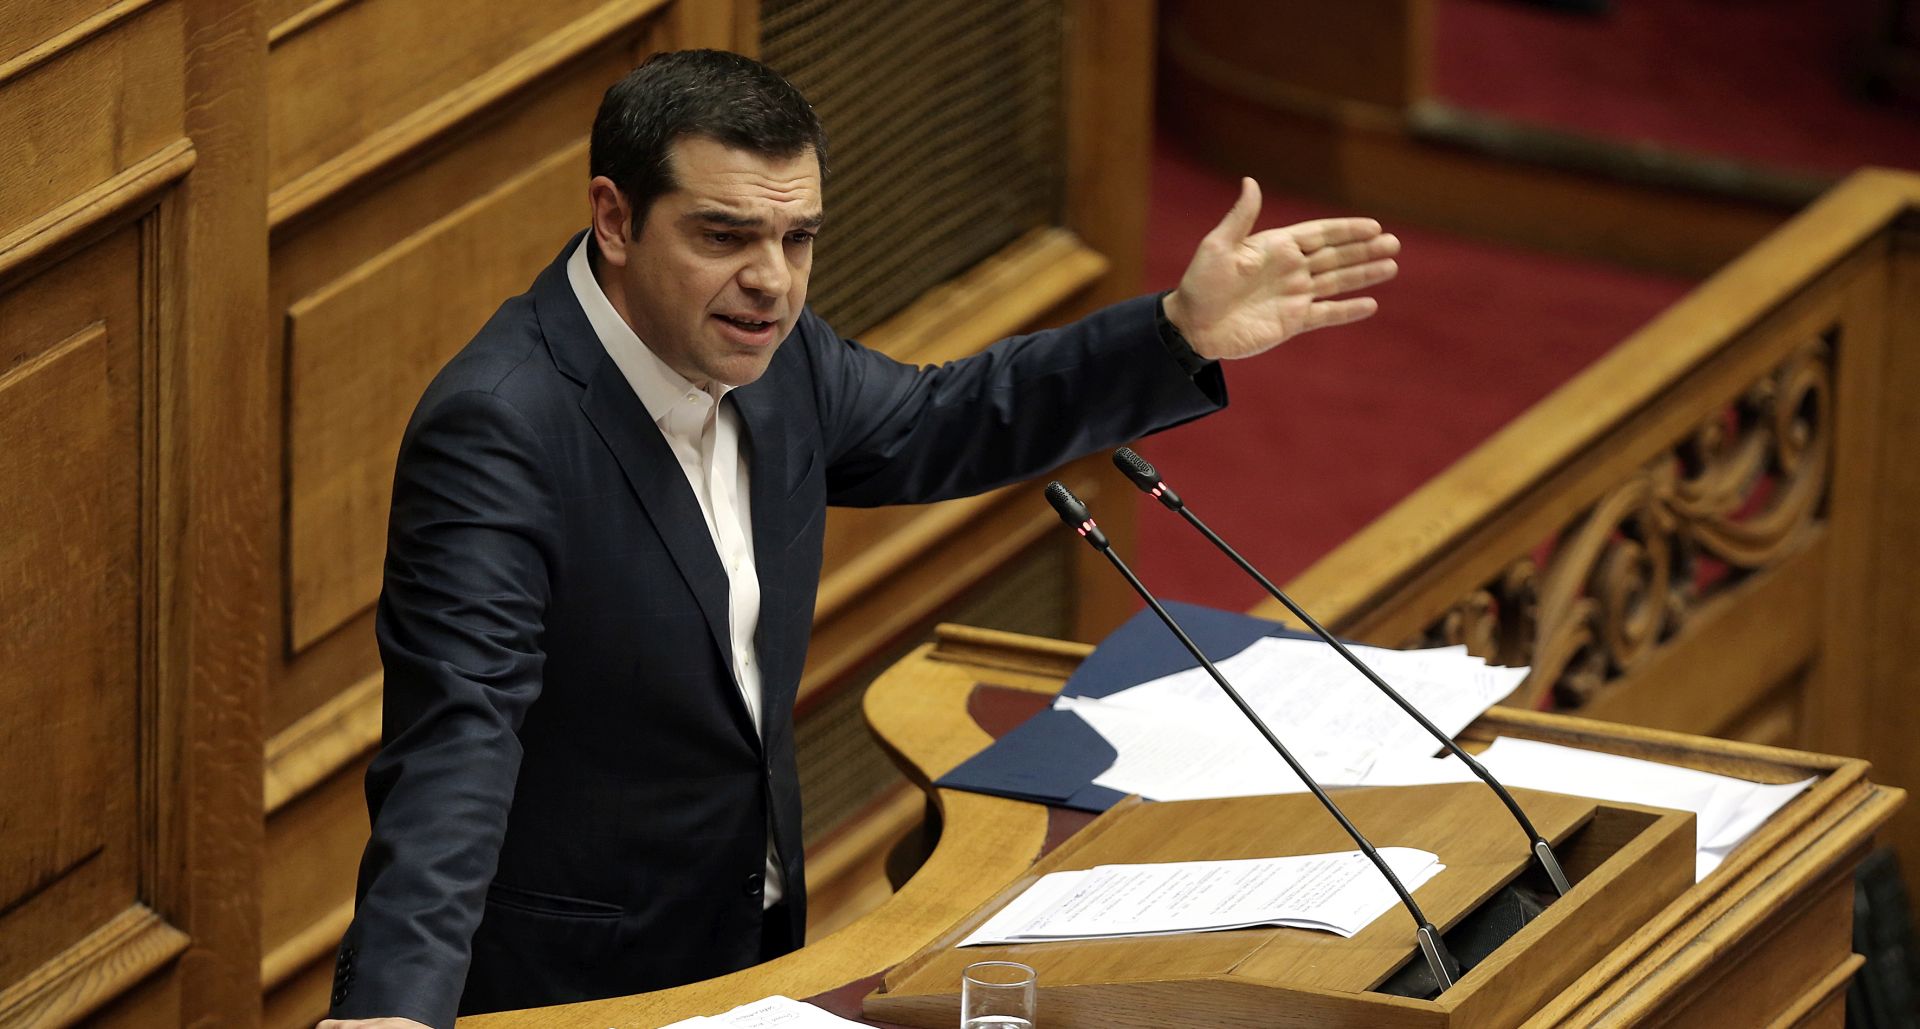 epa07316982 Greek Prime Minister Alexis Tsipras delivers a speech during a debate on the Prespes Agreement in the parliament plenary in Athens, Greece, 24 January 2019. The discussion and processing of the draft law ratifying the name issue agreement signed by Greece and FYROM began on 23 January and will continue until 25 January, when voting will take place.  EPA/SIMELA PANTZARTZI